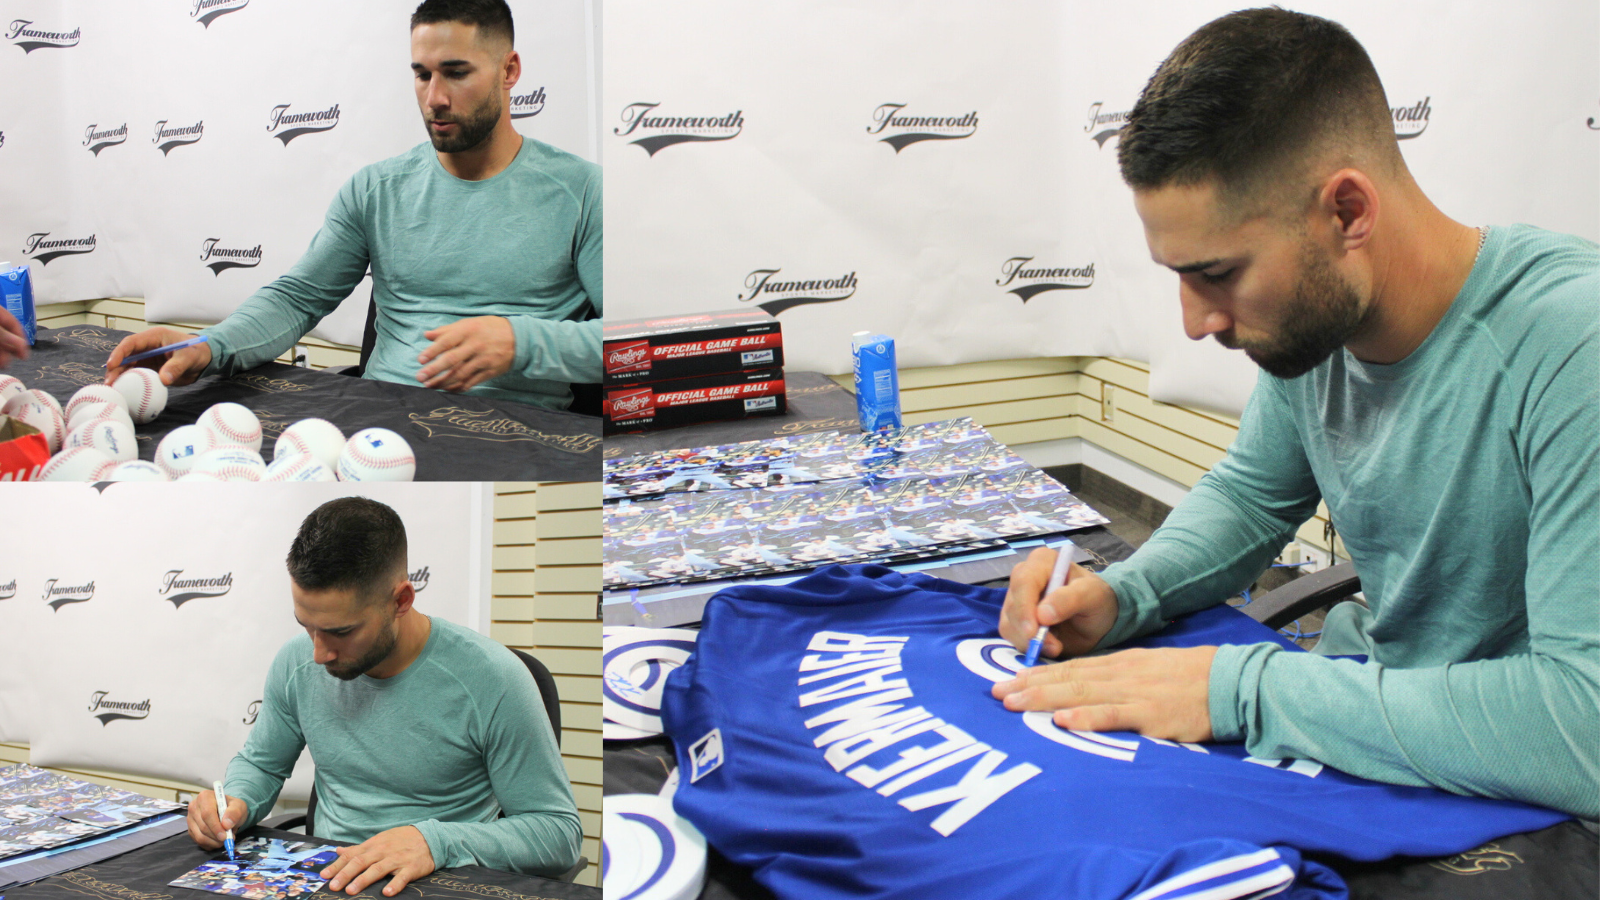 Kevin Kiermaier signs exclusive autograph agreement with Frameworth Sports